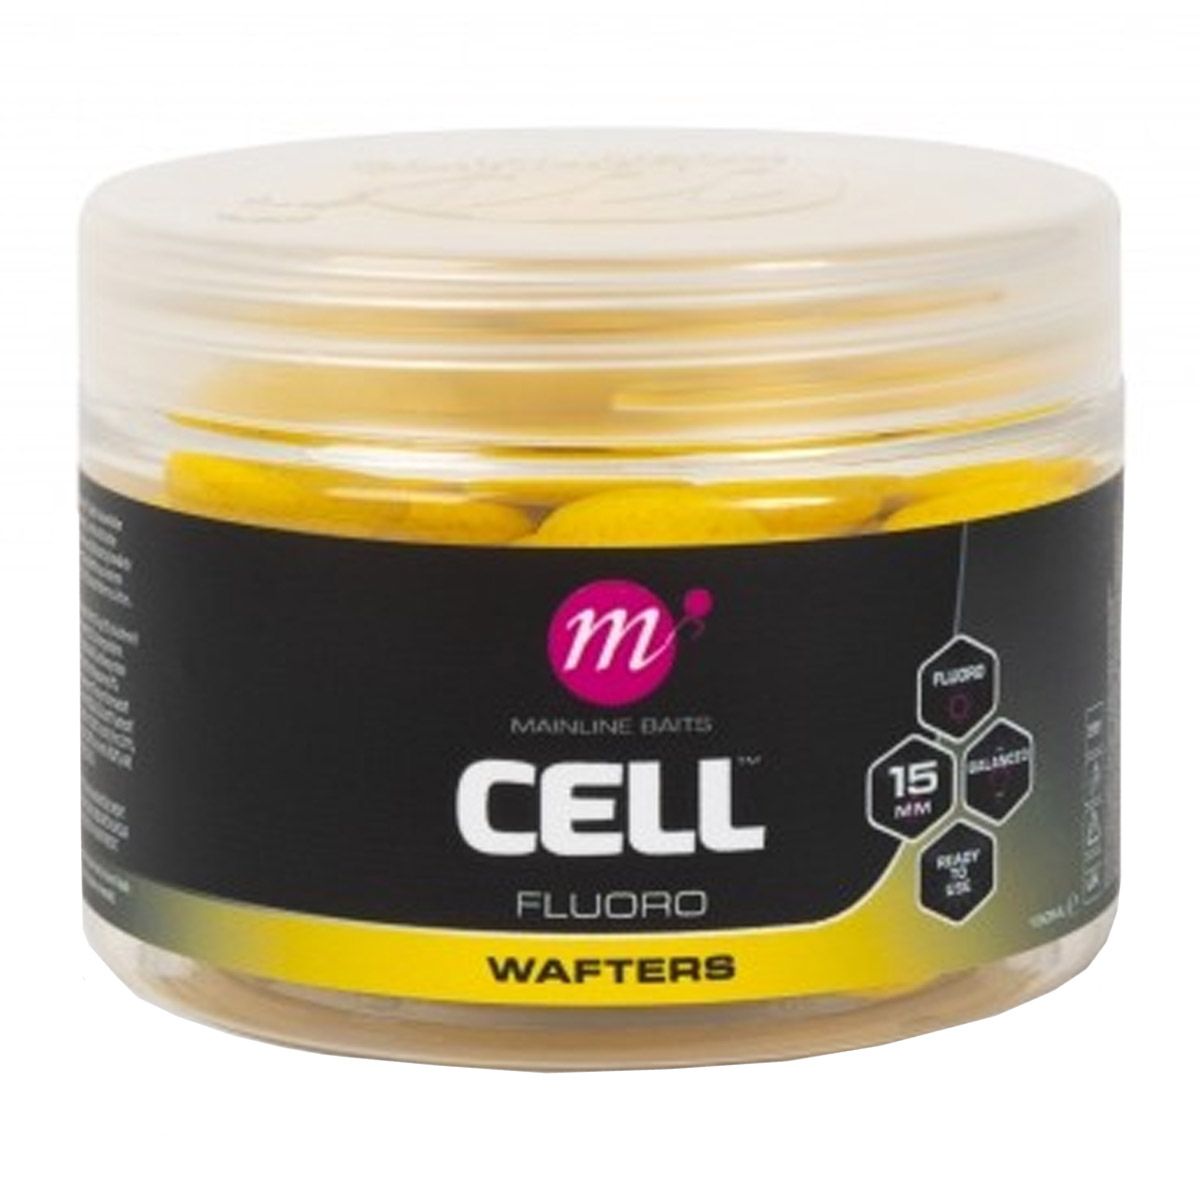 Mainline Fluoro Wafters Yellow 15 MM  -  Cell